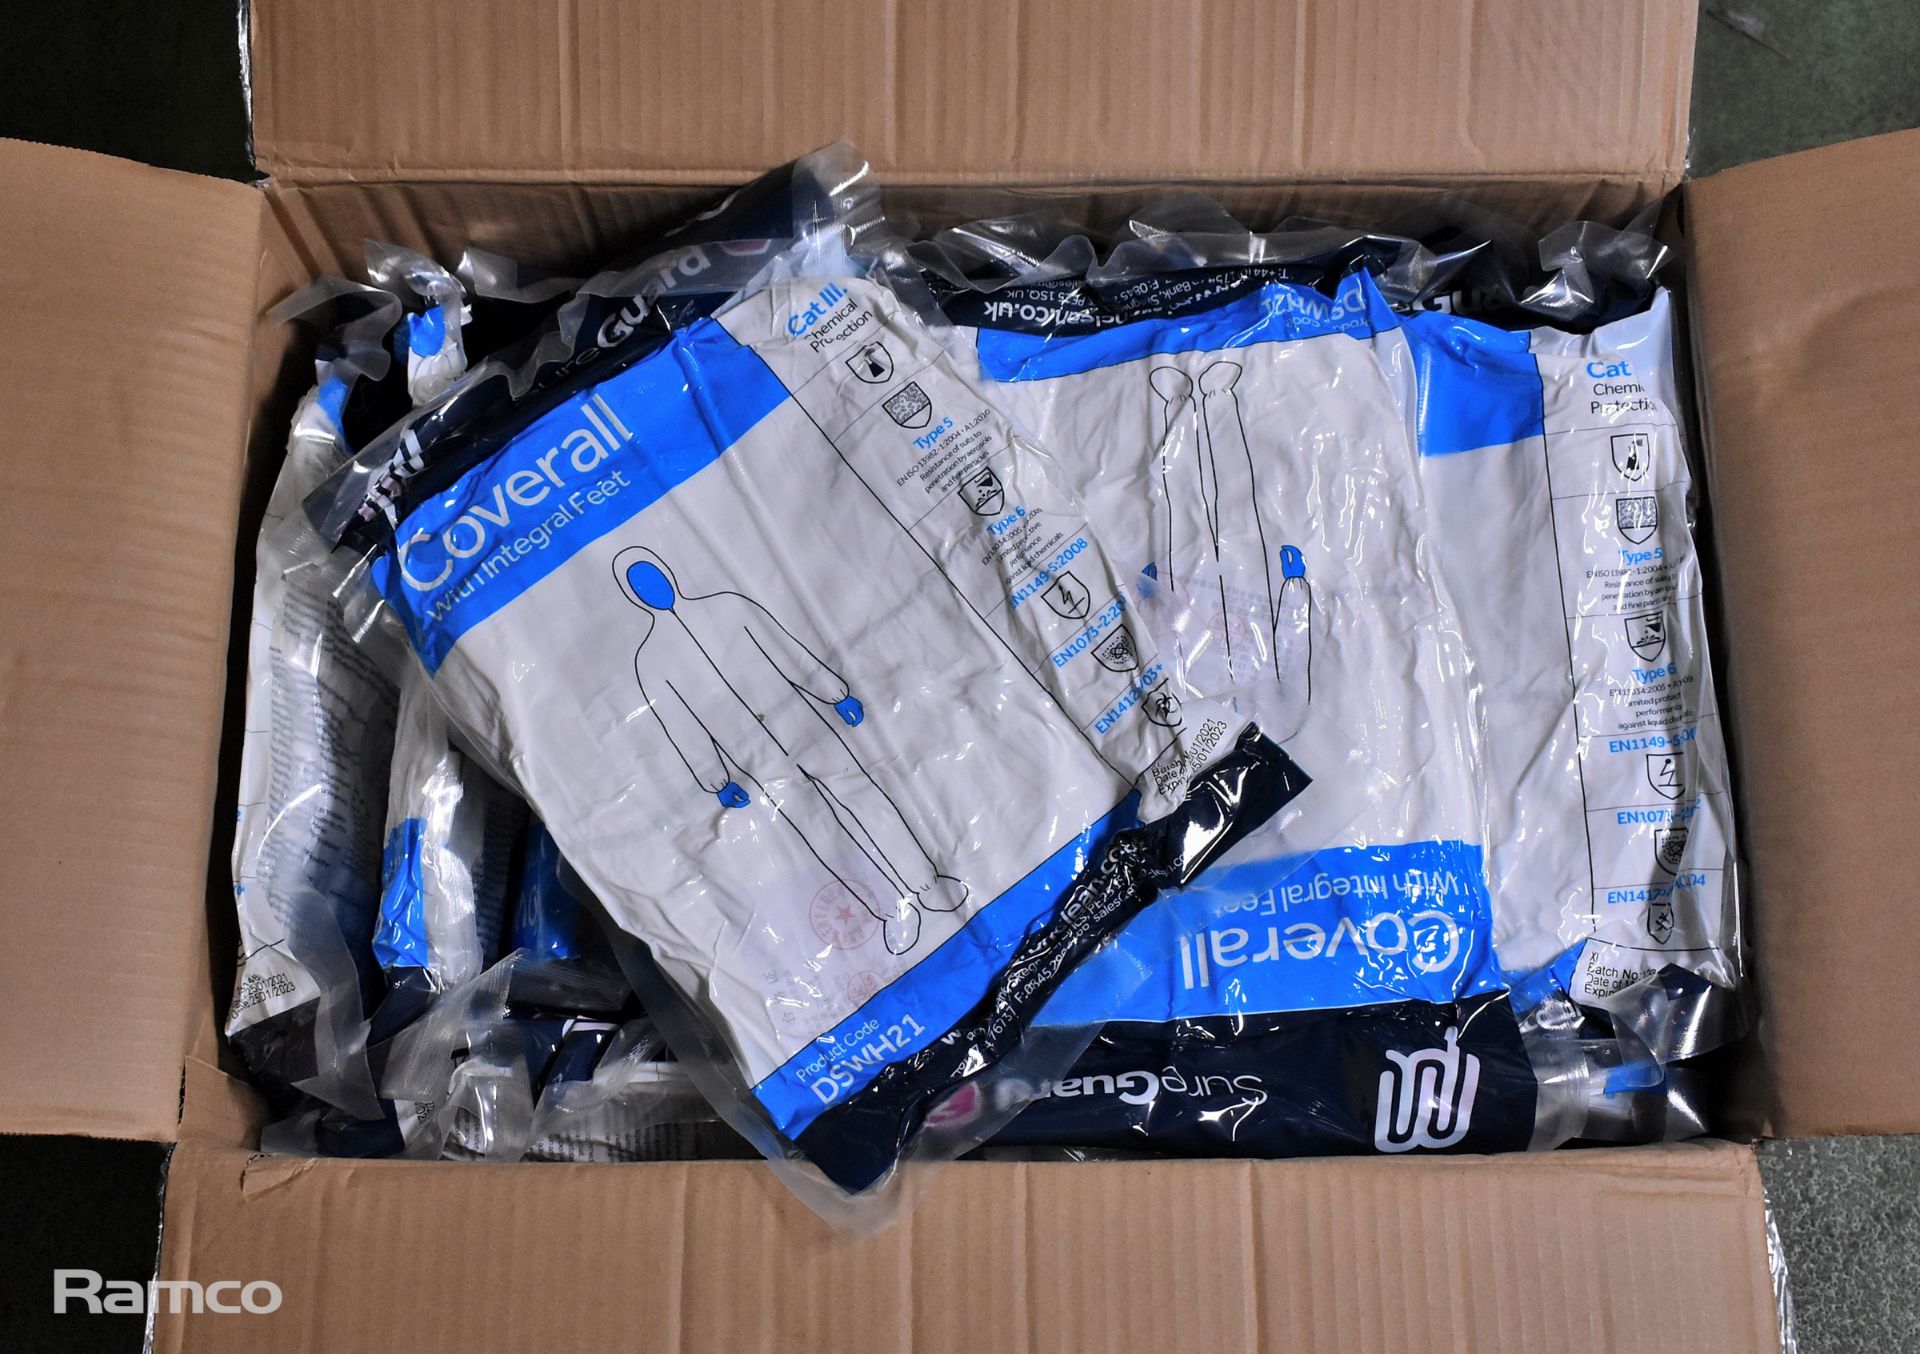 2x boxes of MicroClean SureGuard 3 coveralls with integral feet - size X Large - 25 units per box - Image 3 of 4